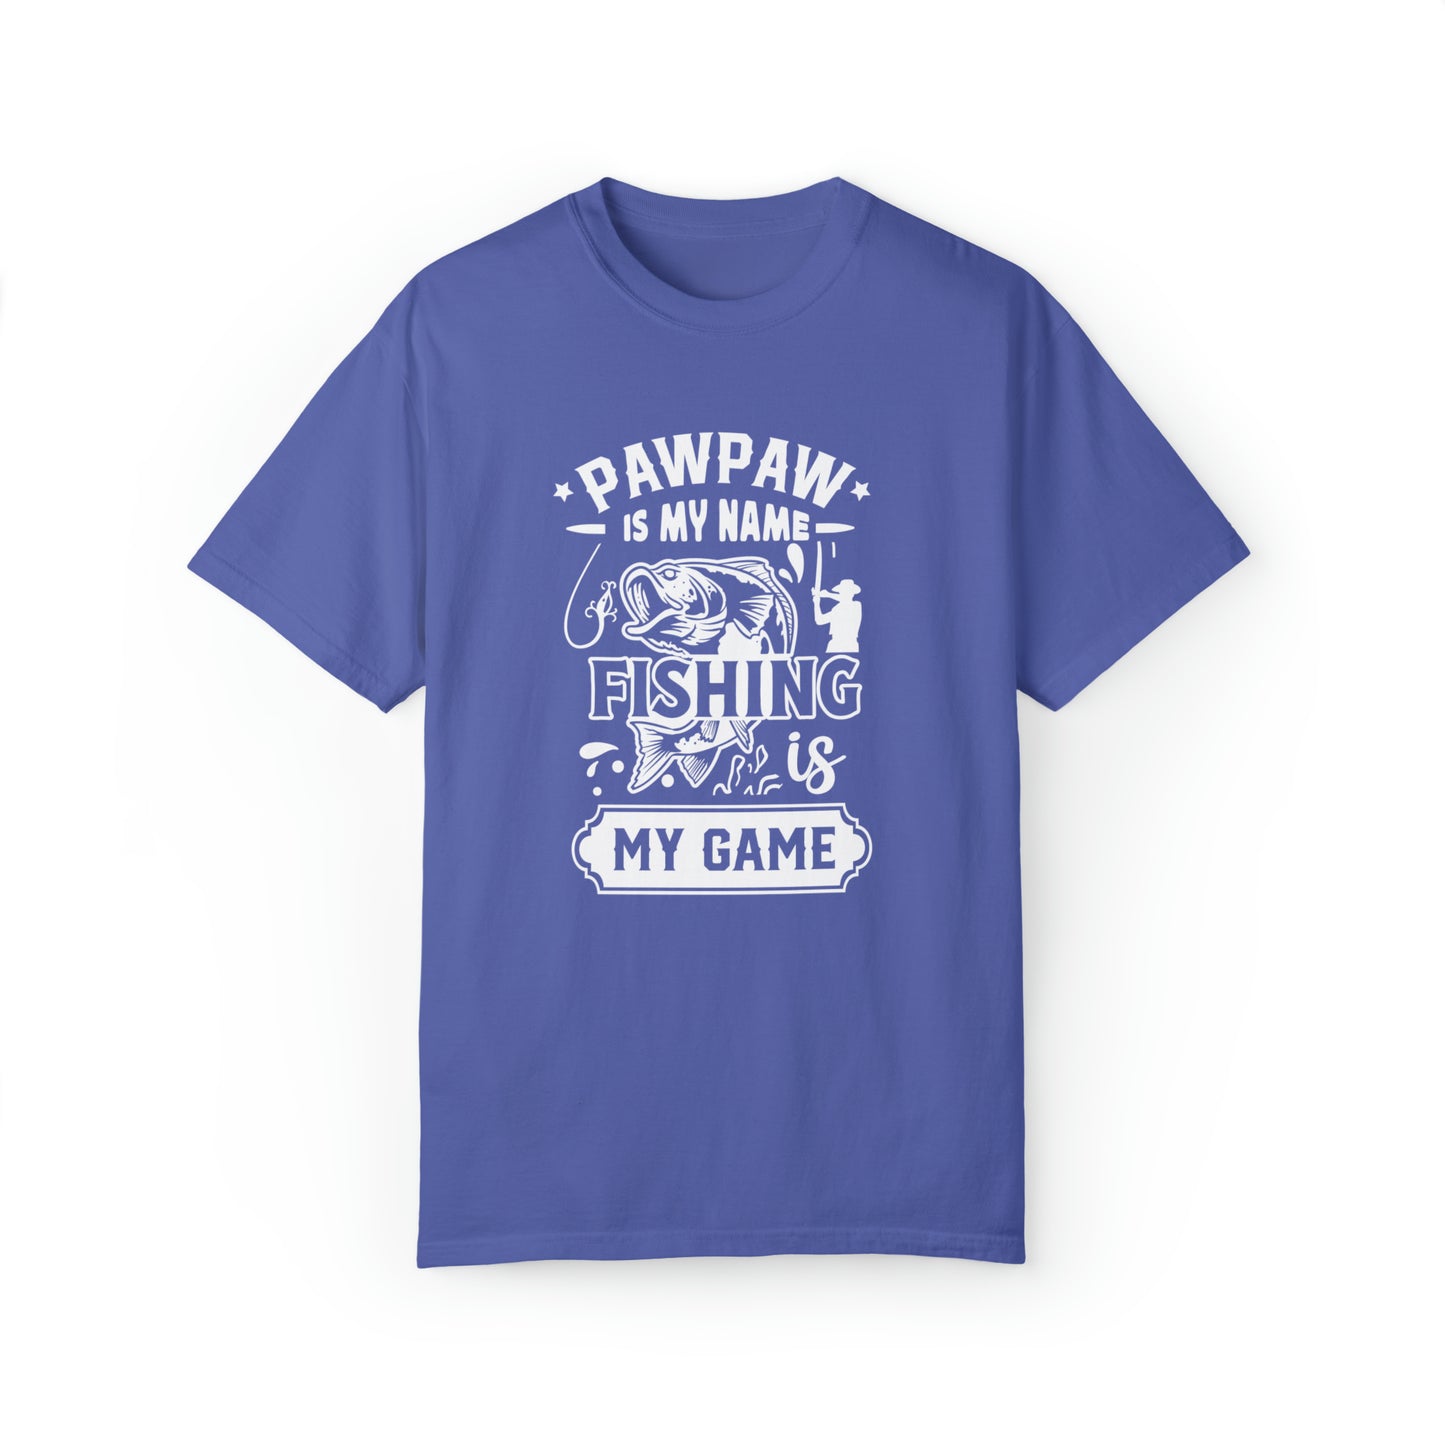 Embrace Fishing with Style: Pawpaw's Game in this Classic White T-Shirt